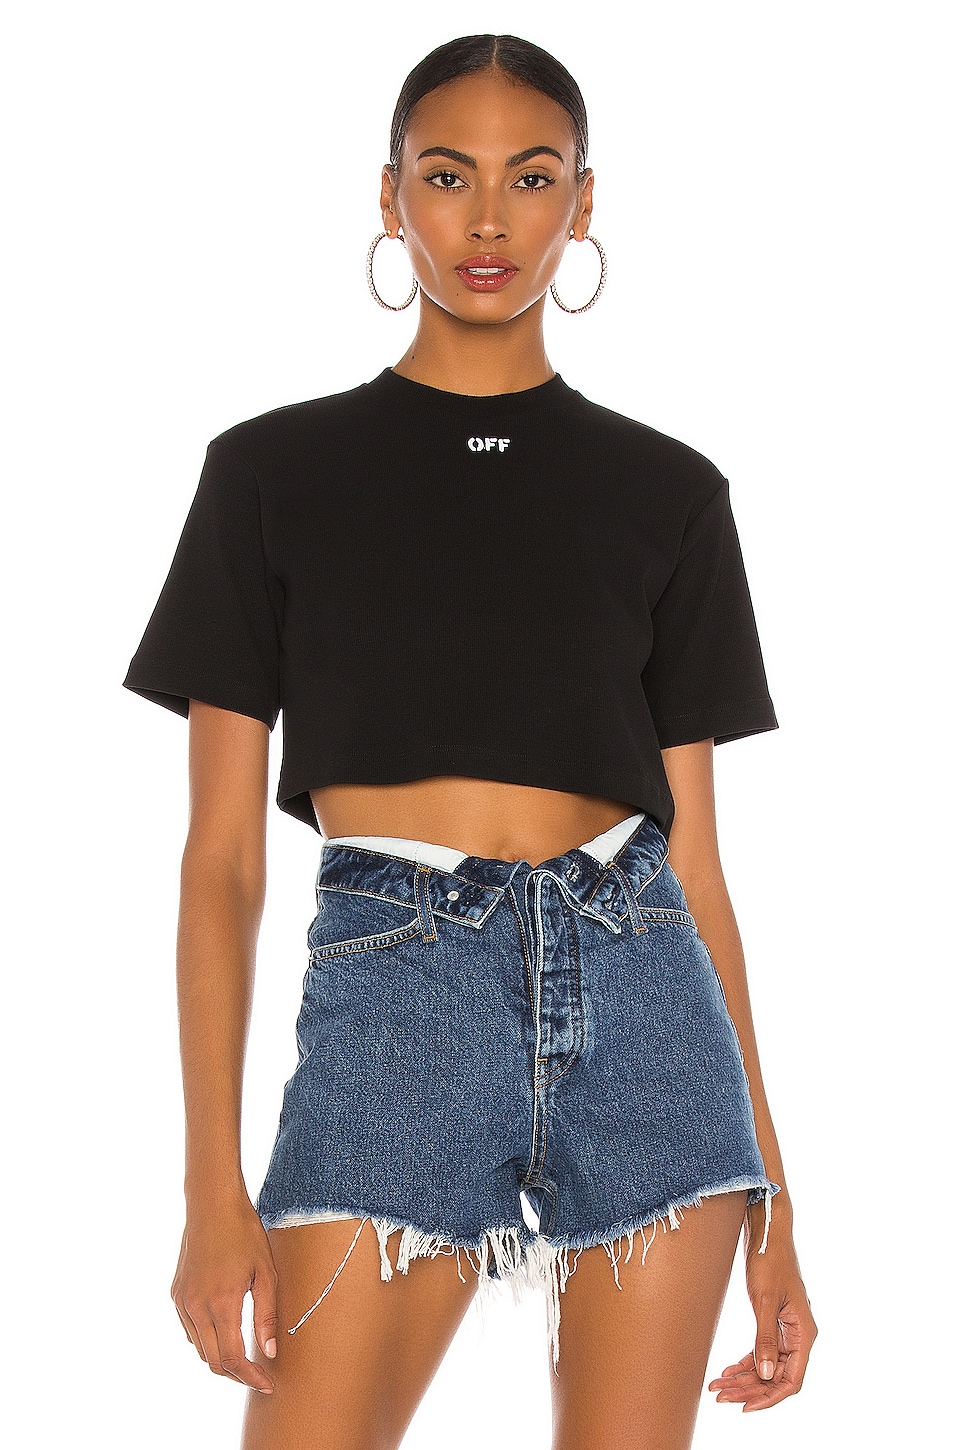 OFF-WHITE Rib Cropped Casual Tee in Black & White | REVOLVE